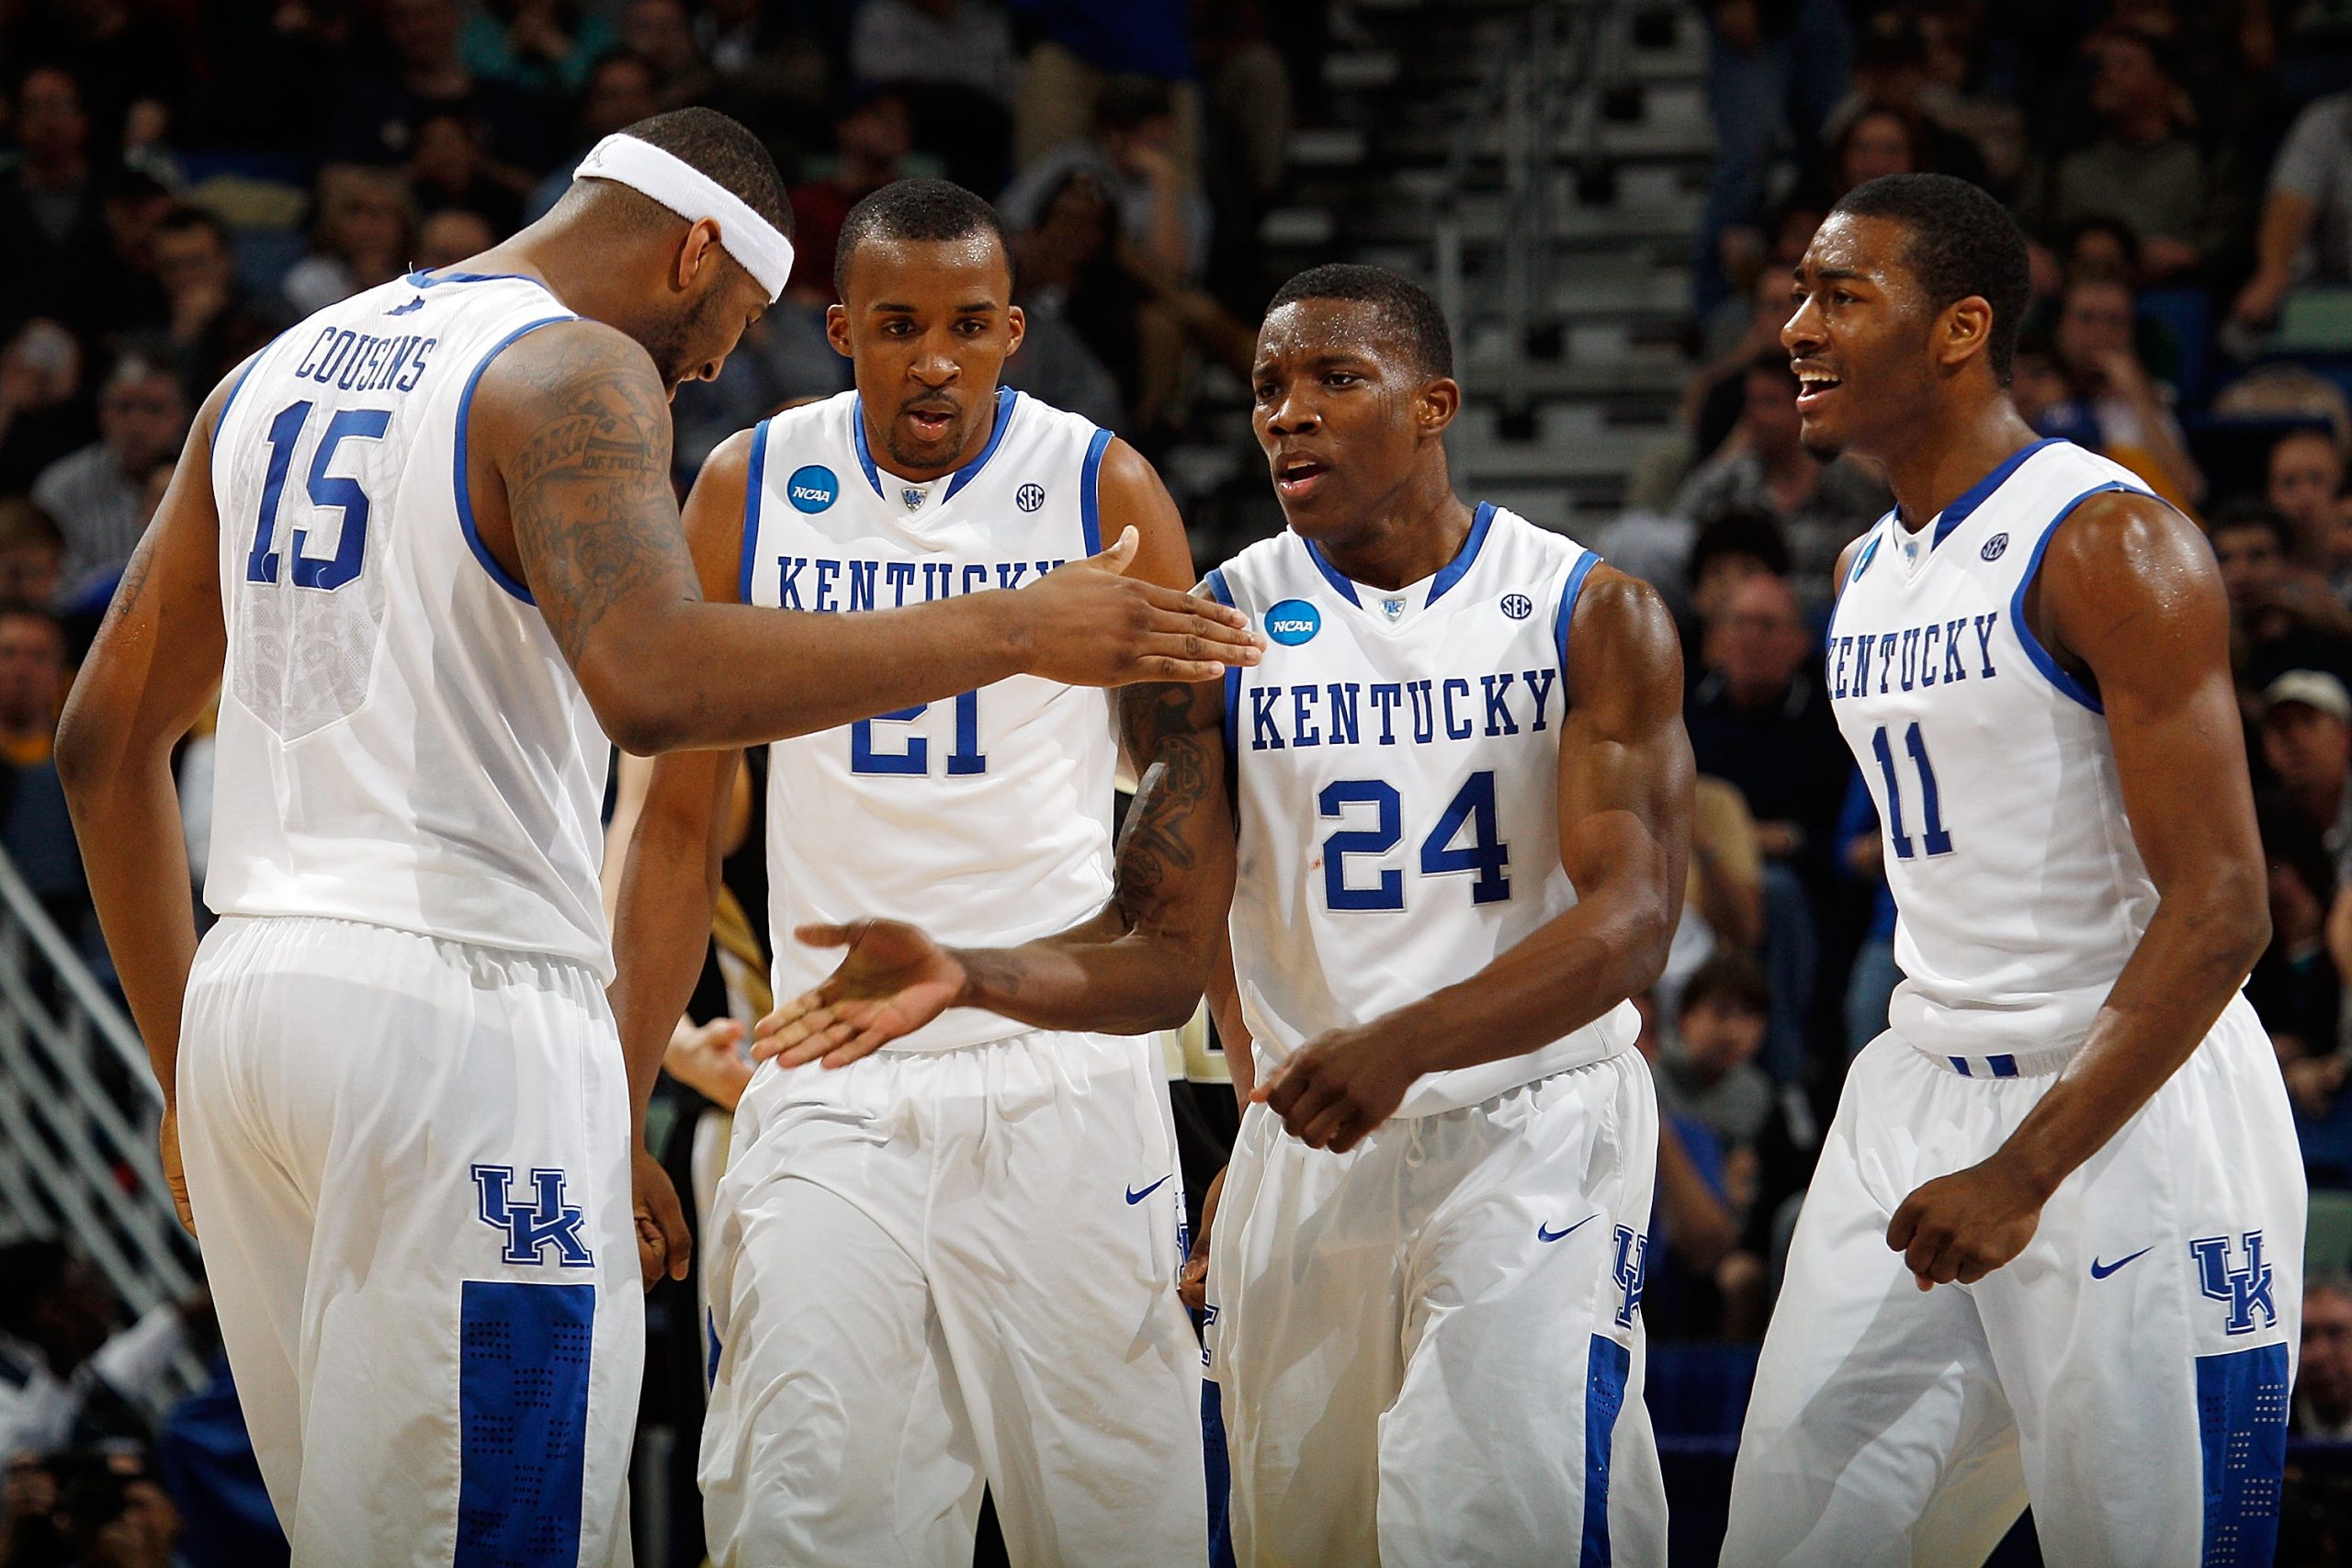 The 30 Most Influential NCAA MBB Teams of SLAM’s 30 Years: ’10 Kentucky 